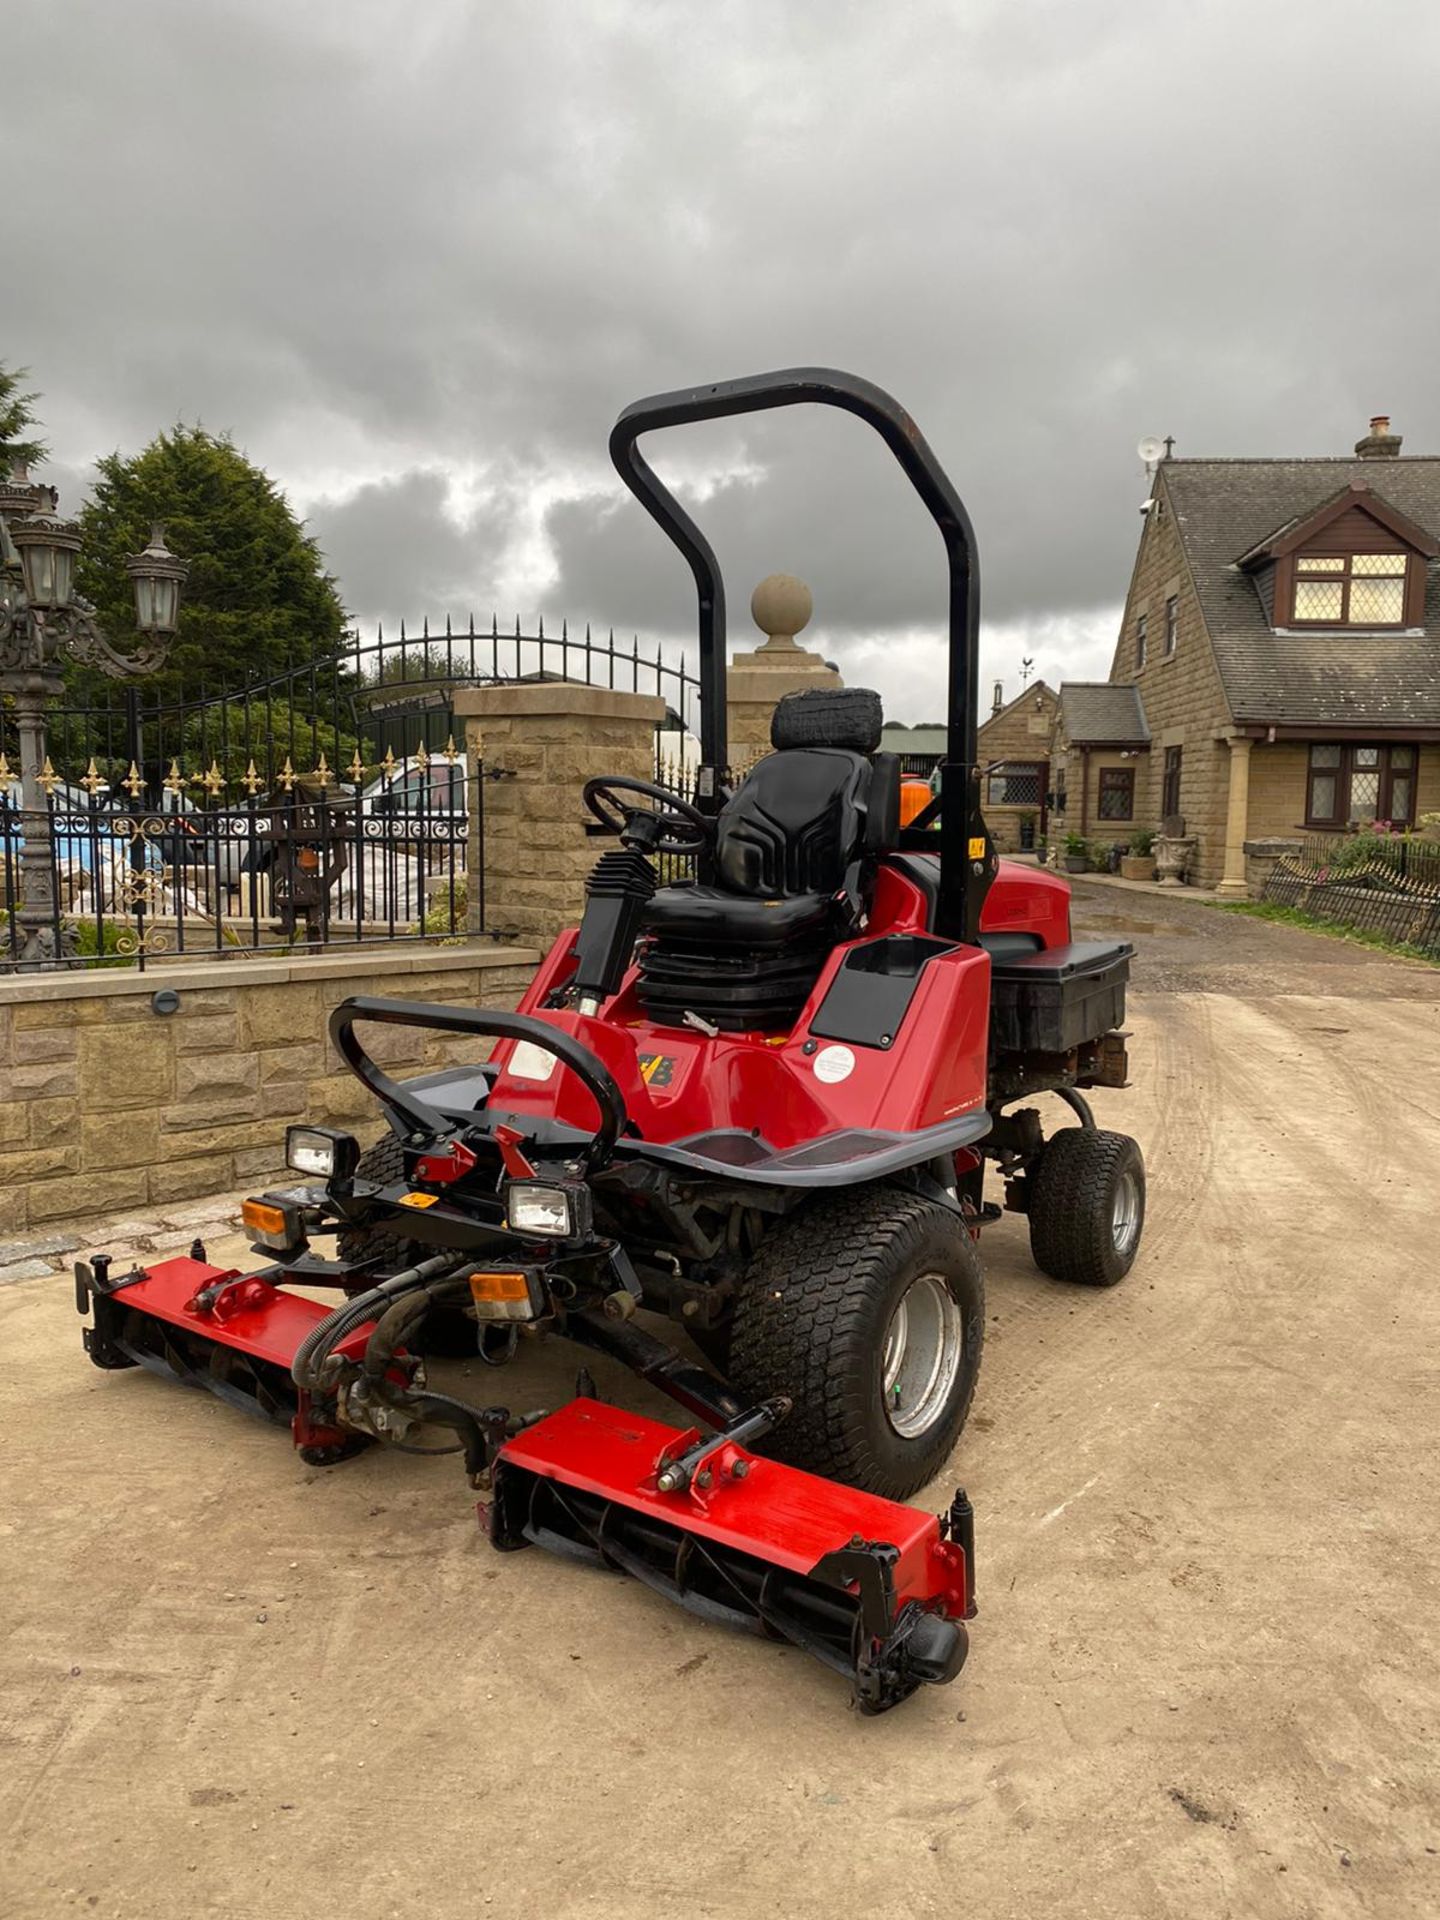 TORO LT3240 RIDE ON LAWN MOWER, 2012 ROAD REGISTERED, 4 WHEEL DRIVE, VERY CLEAN CONDITION *PLUS VAT* - Image 3 of 6